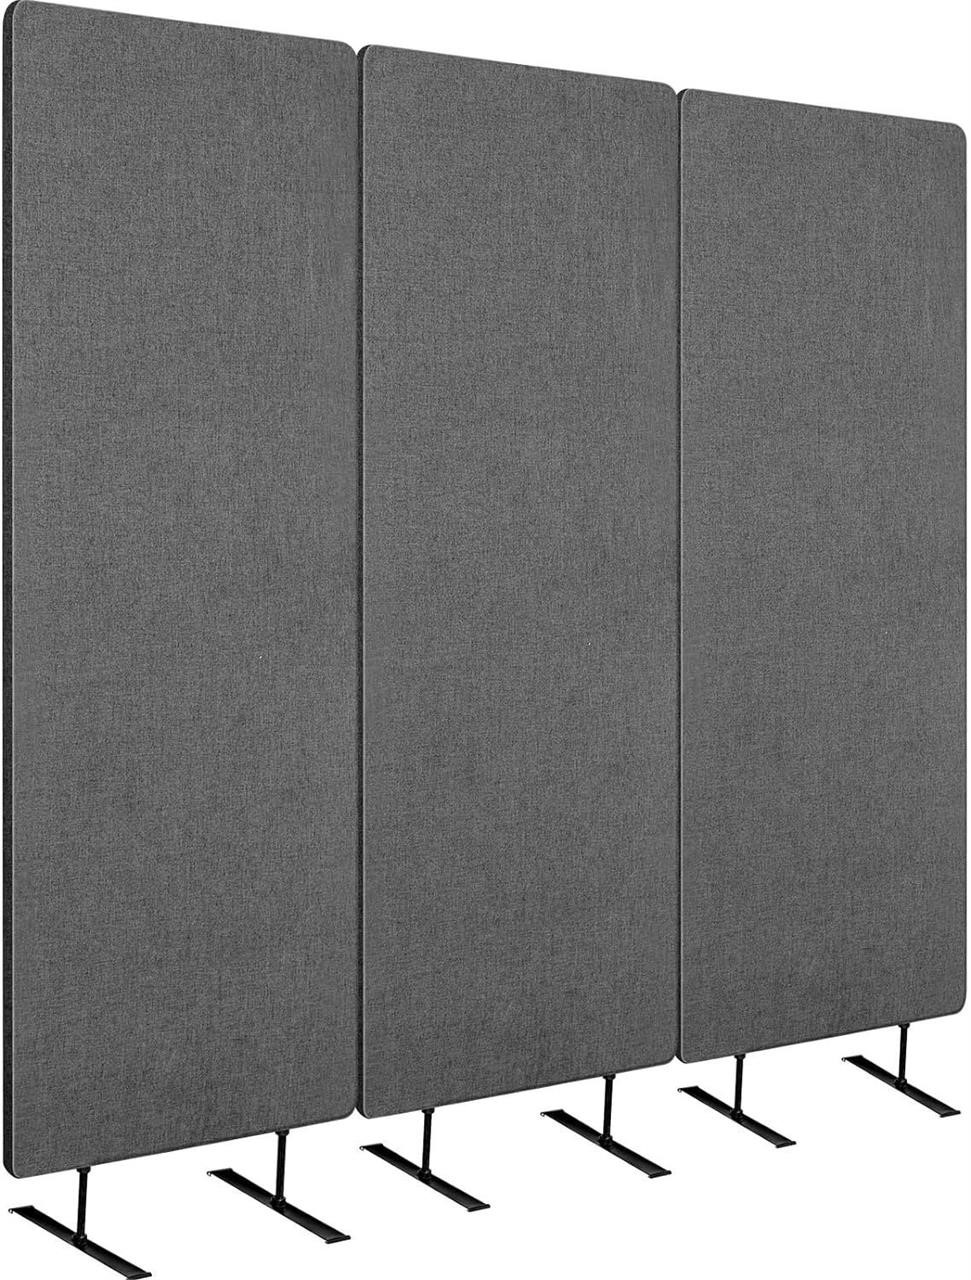 3 Pack Privacy Divider